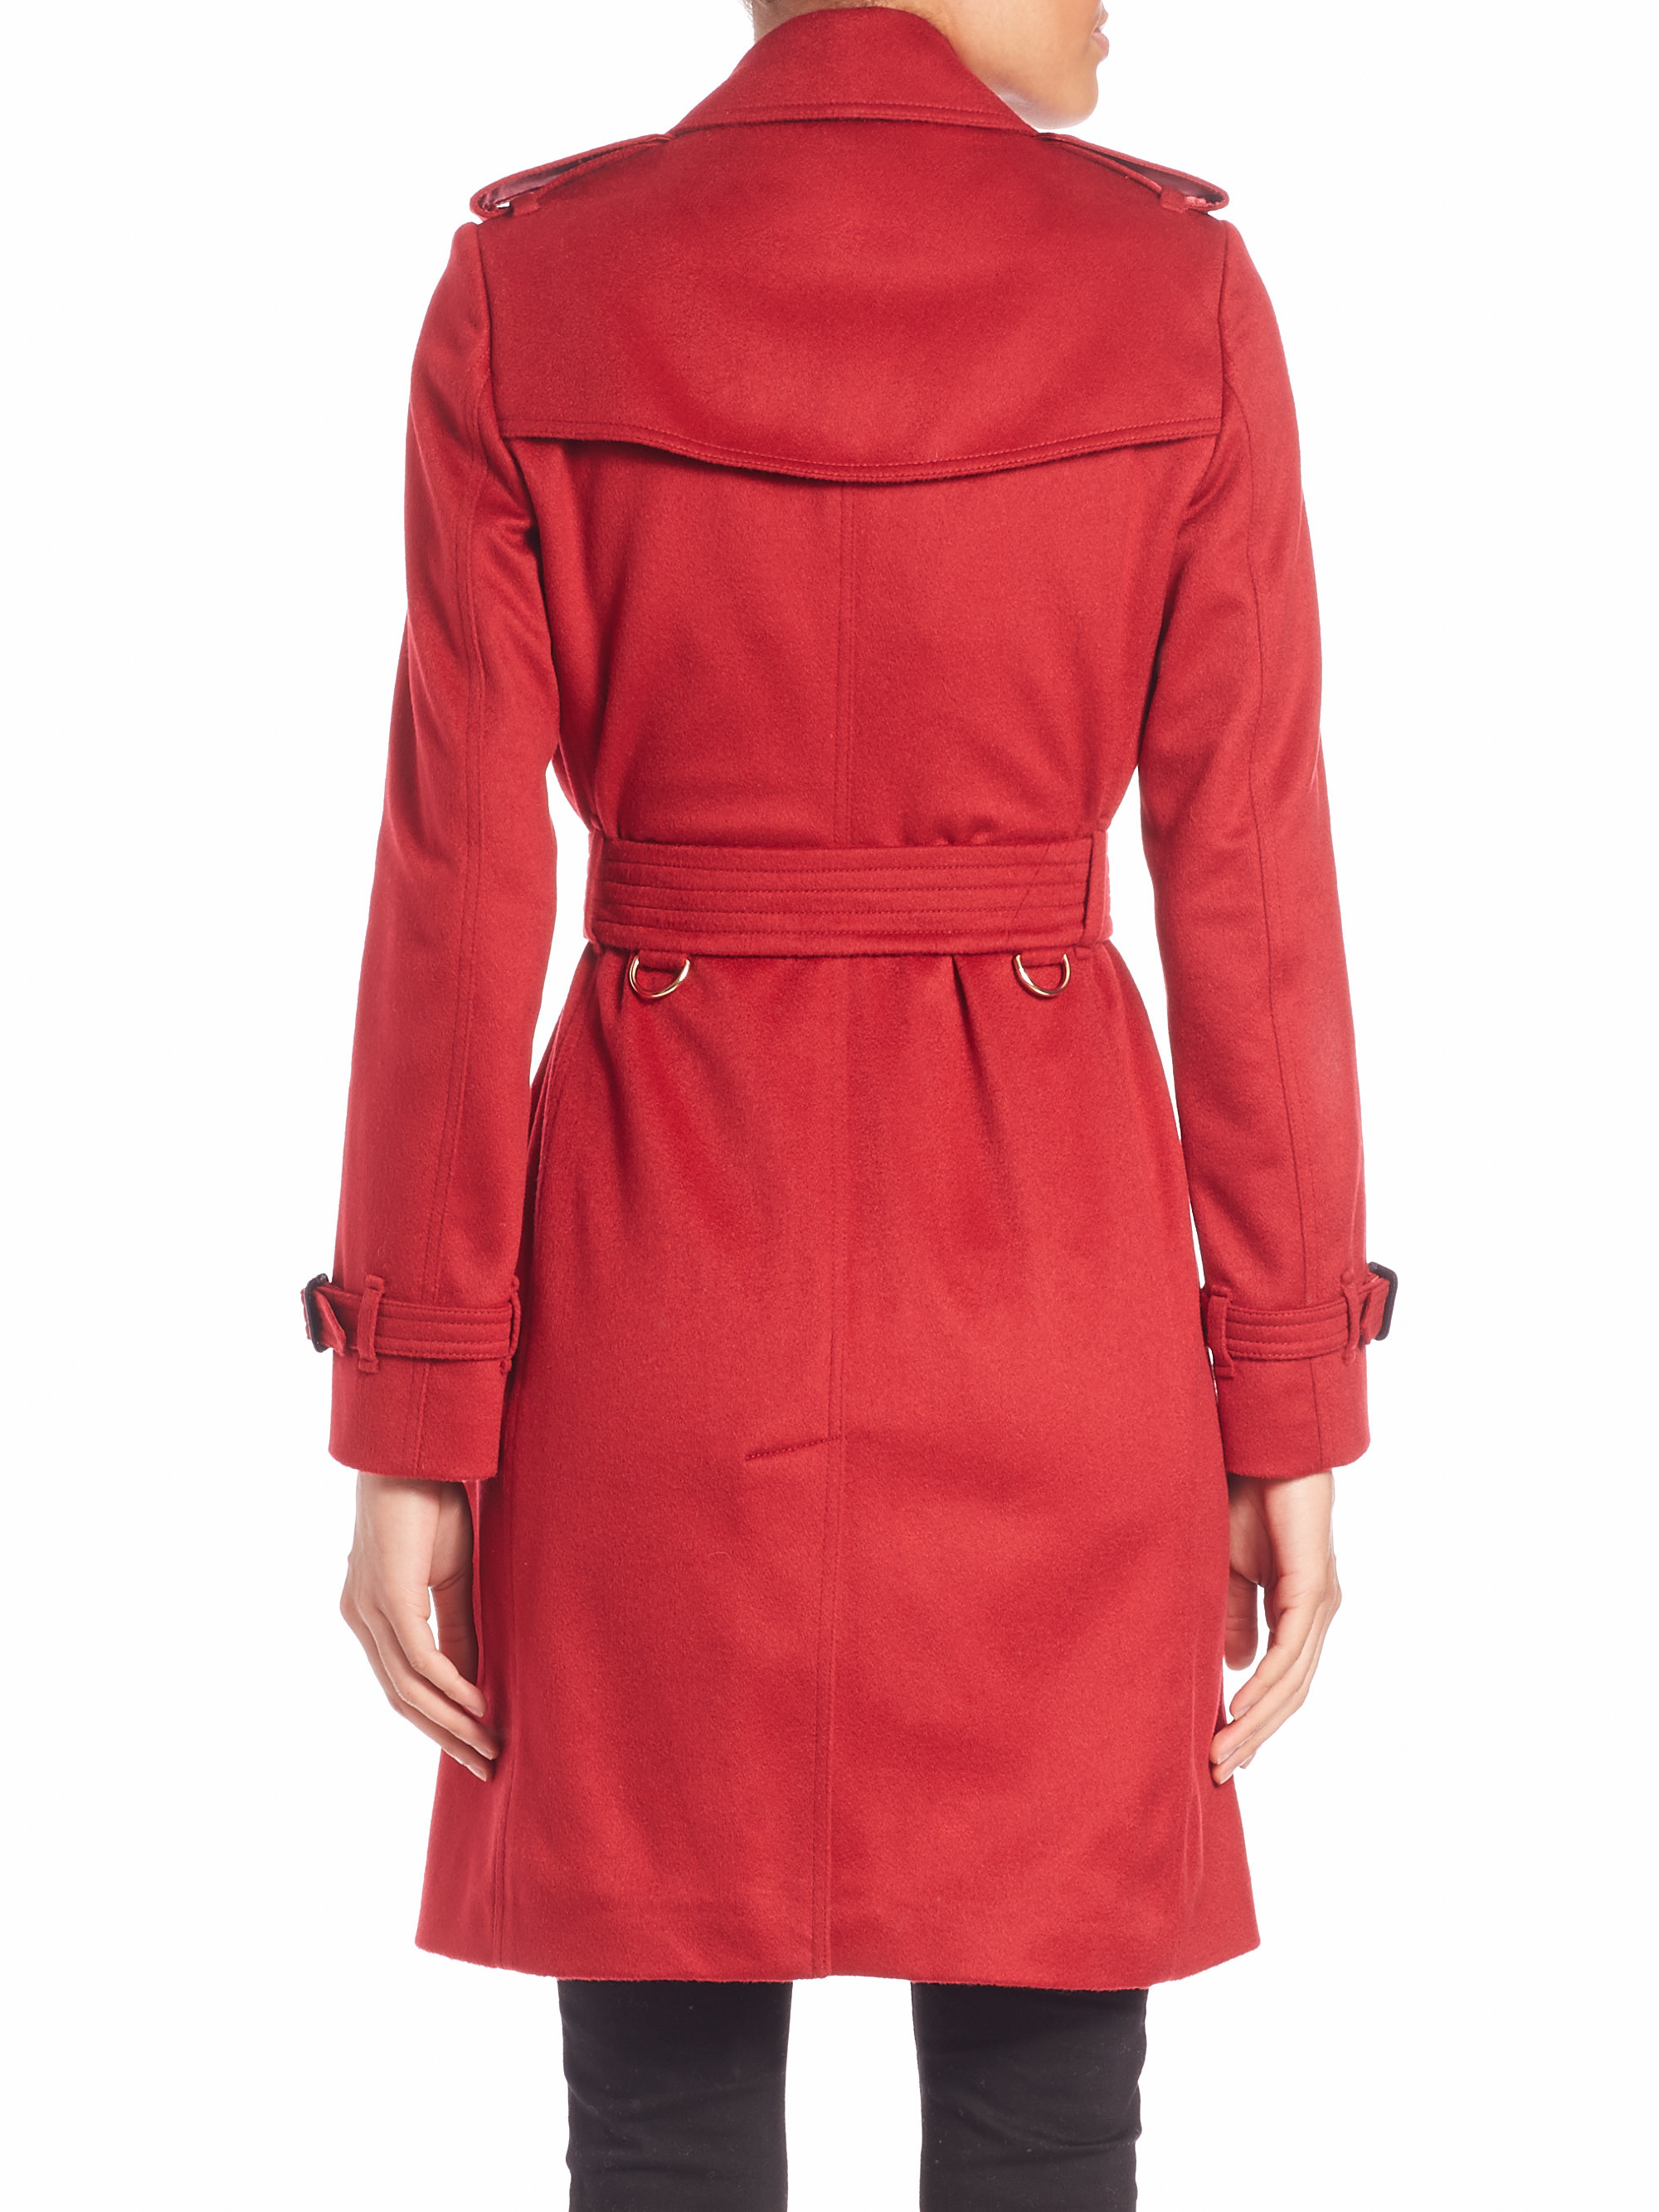 Lyst - Burberry Kensington Parade Red Cashmere Trench Coat in Red